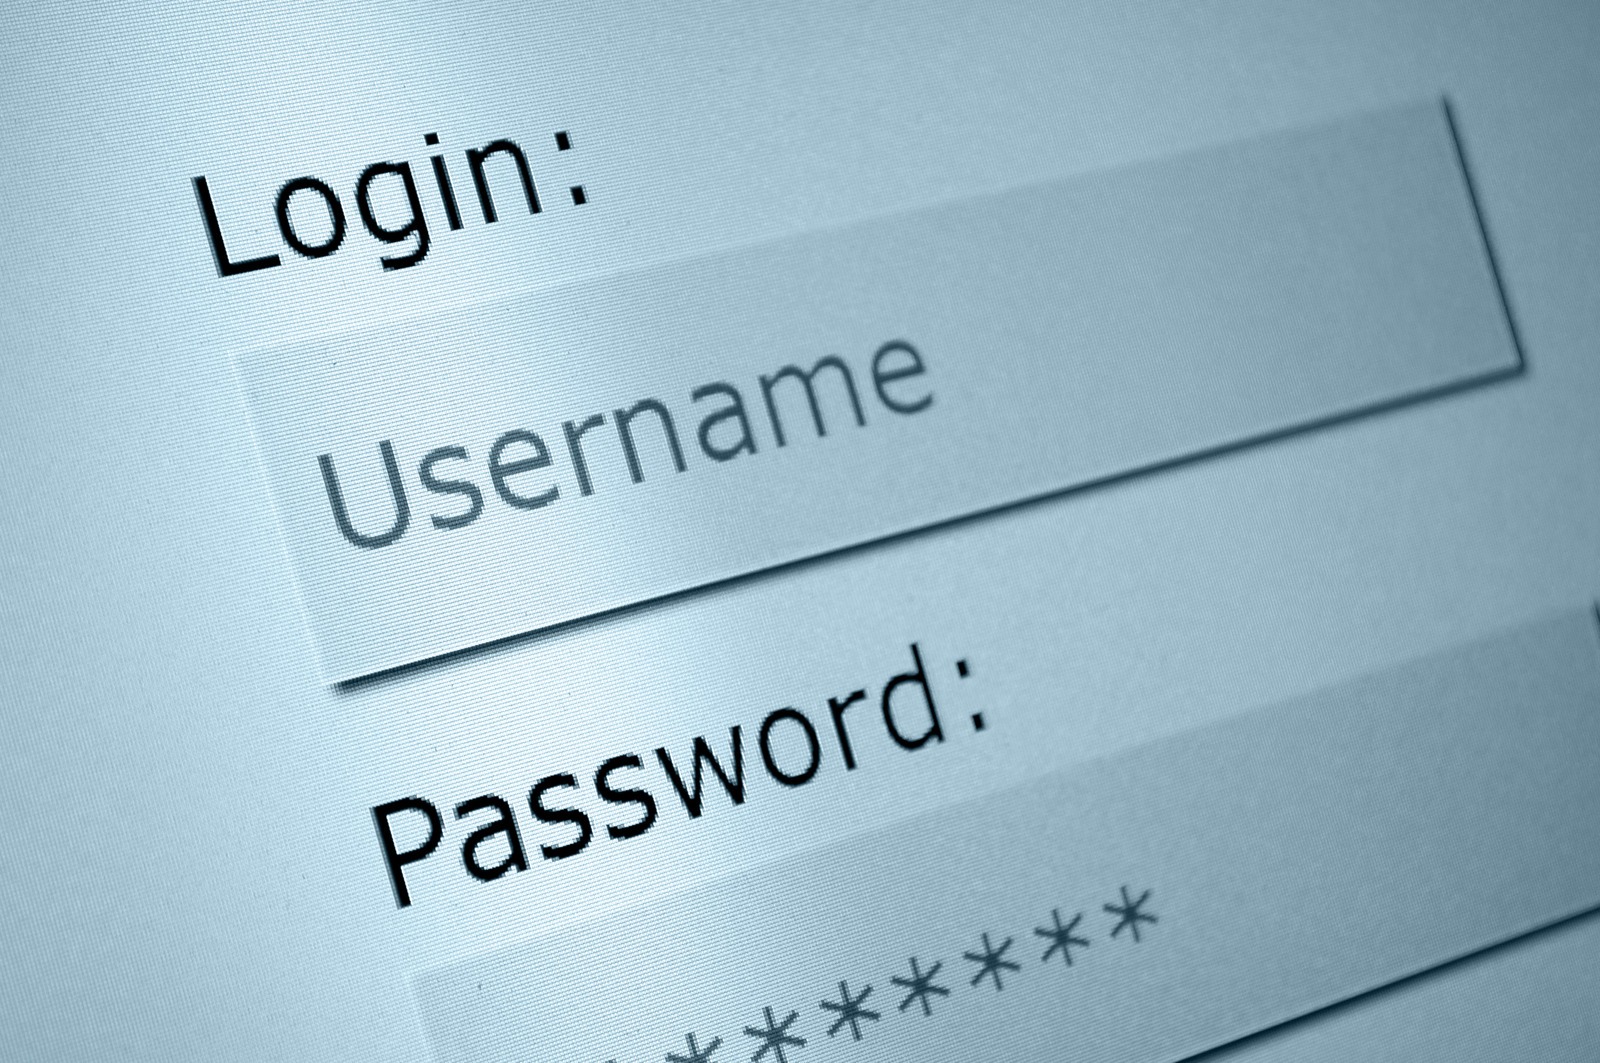 Close-up view of a digital login screen displaying fields for 'Username' and 'Password', with the password field showing obscured characters for security.